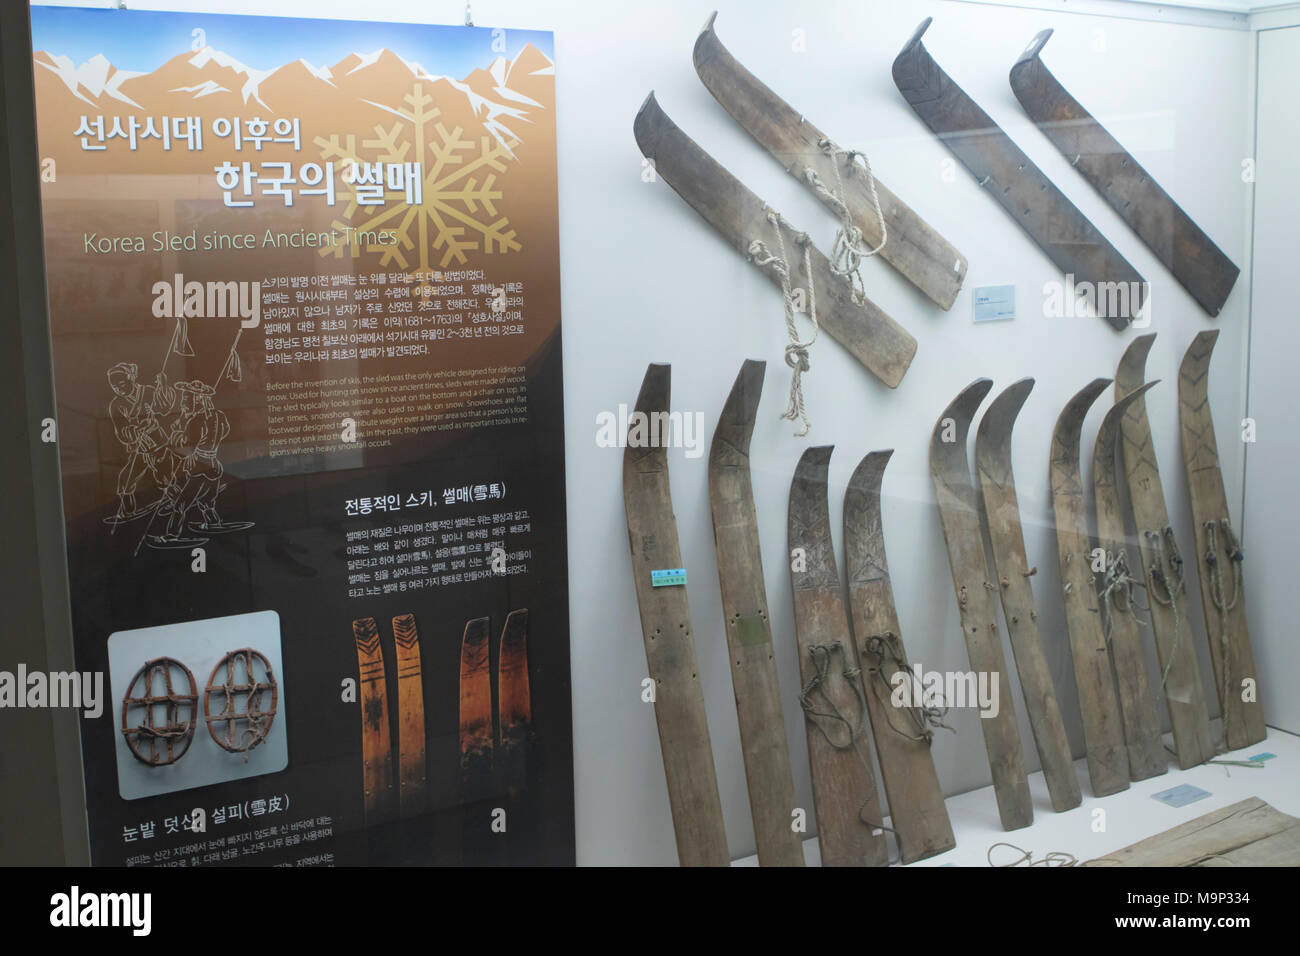 The Deagwallyong museum shows the history of skiing in Korea and the world. On display are Korean sleds, that look like a ski, and have been used since the primitive age.    The Alpensia Resort is a ski resort and a tourist attraction. It is located on the territory of the township of Daegwallyeong-myeon, in the county of Pyeongchang, hosting the Winter Olympics in February 2018.  The ski resort is approximately 2.5 hours from Seoul or Incheon Airport by car, predominantly all motorway.   Alpensia has six slopes for skiing and snowboarding, with runs up to 1.4 km (0.87 mi) long, for beginners Stock Photo